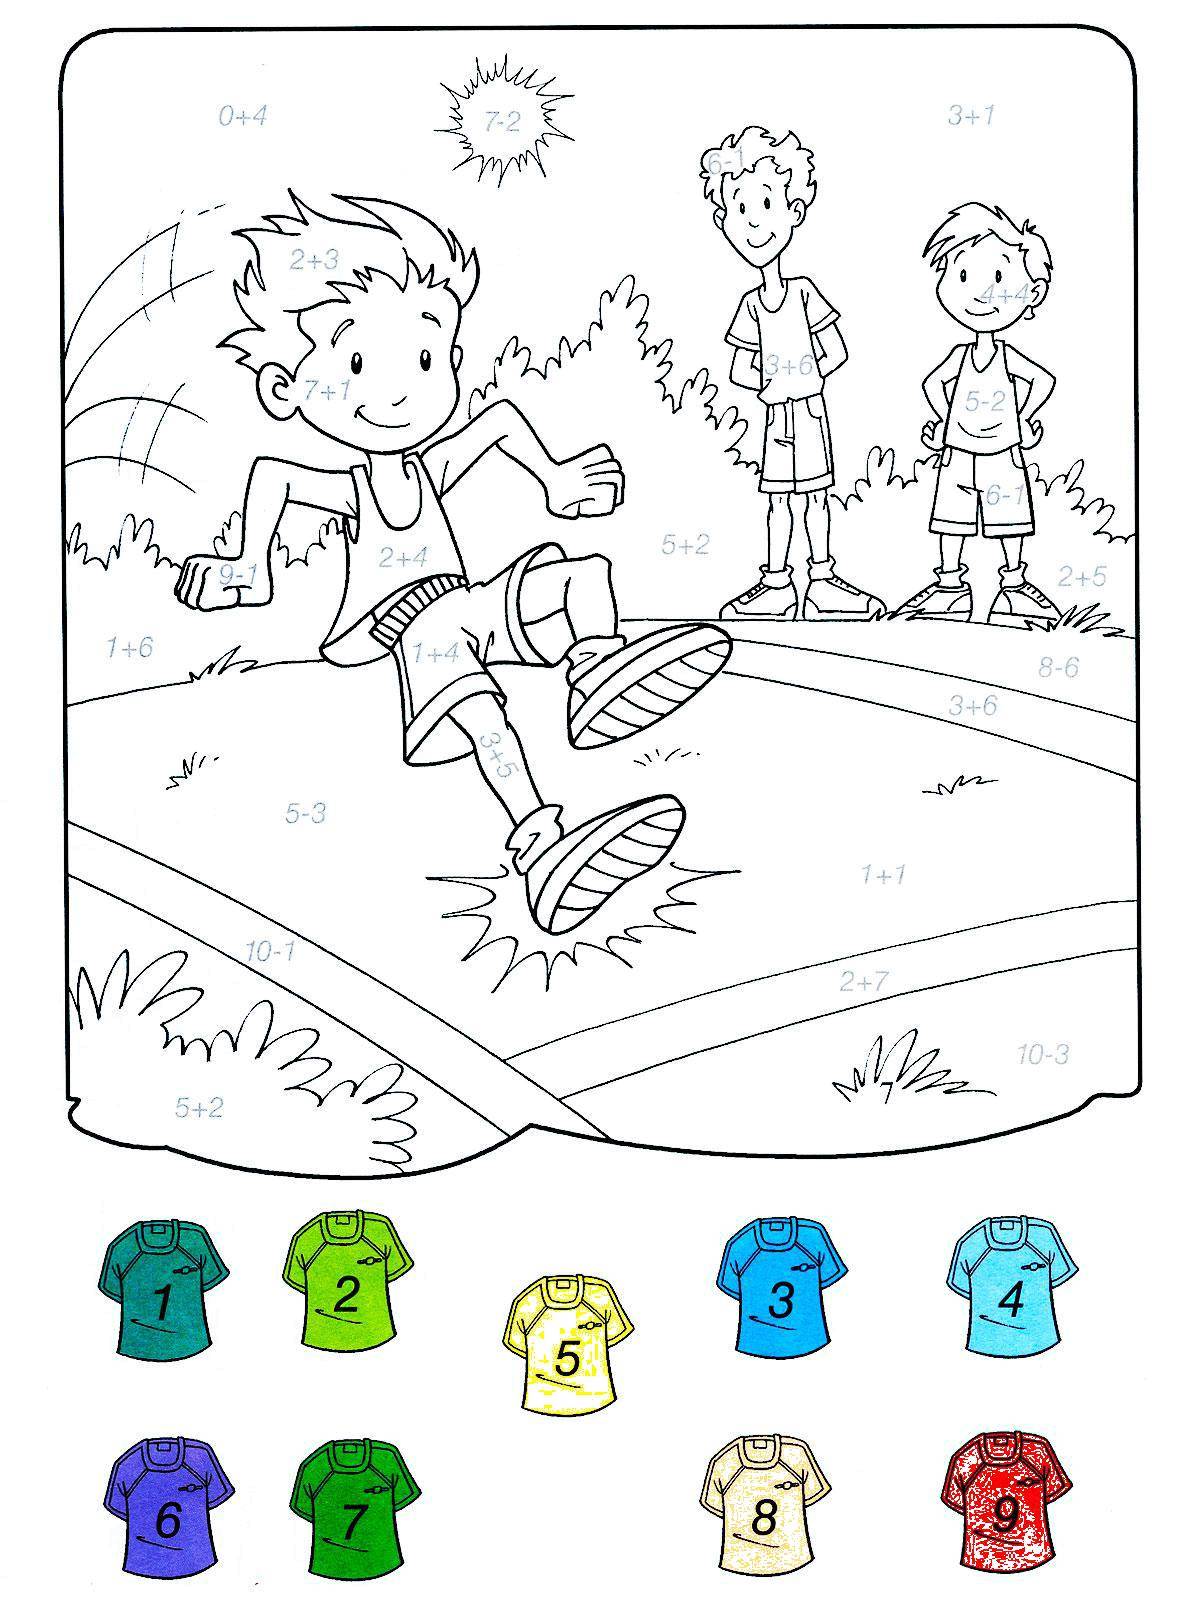 Coloring Paint a picture solving examples. Category mathematical coloring pages. Tags:  examples, kids, math, games.